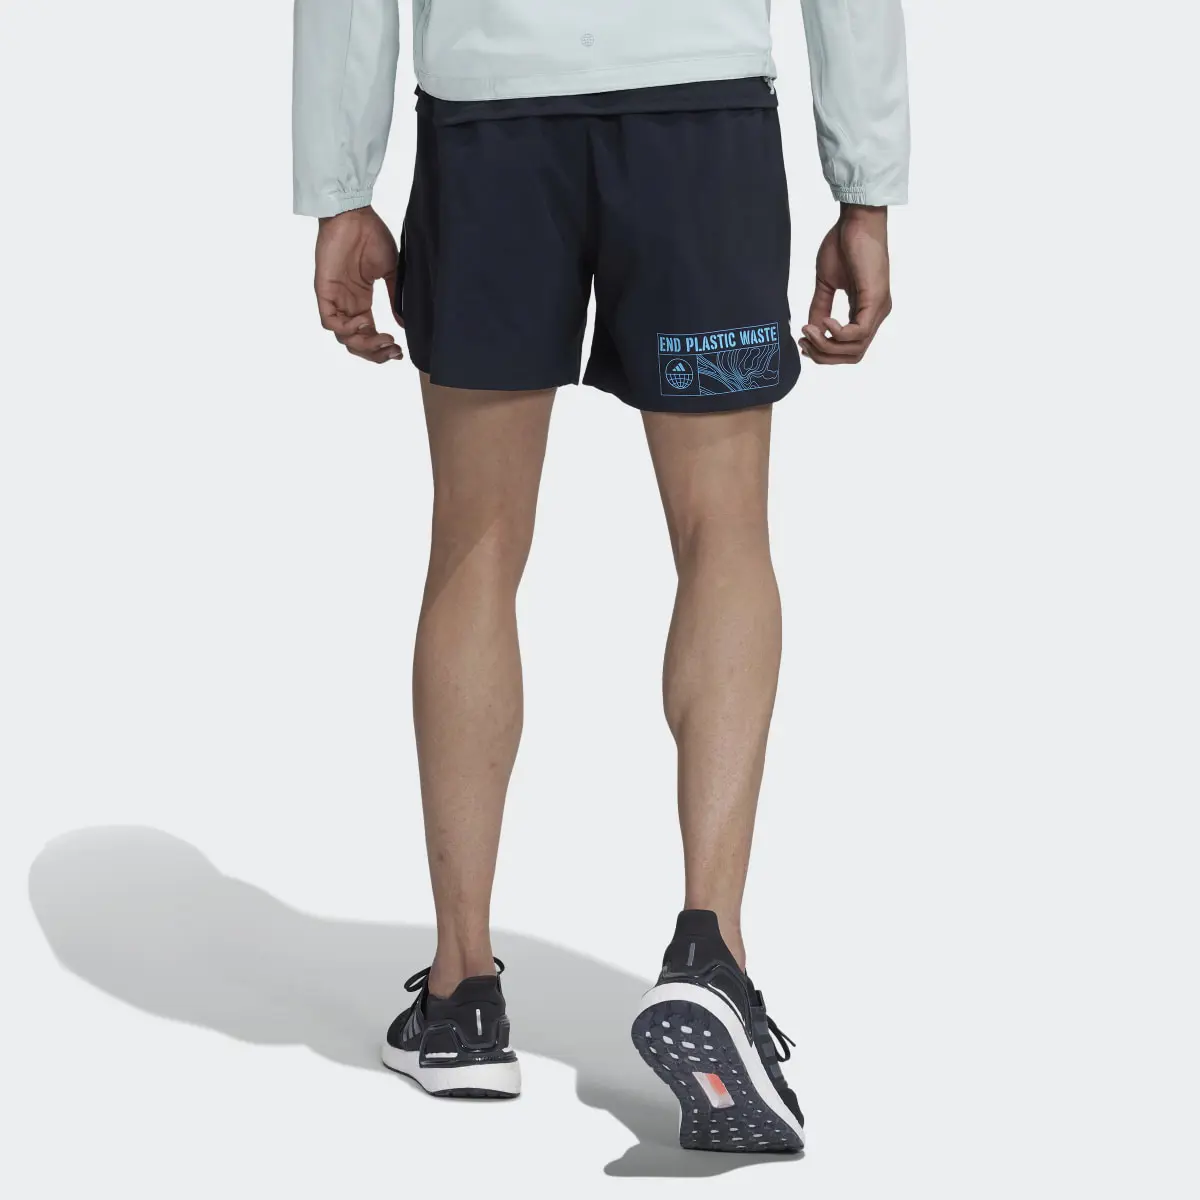 Adidas Shorts Designed for Running for the Oceans. 2